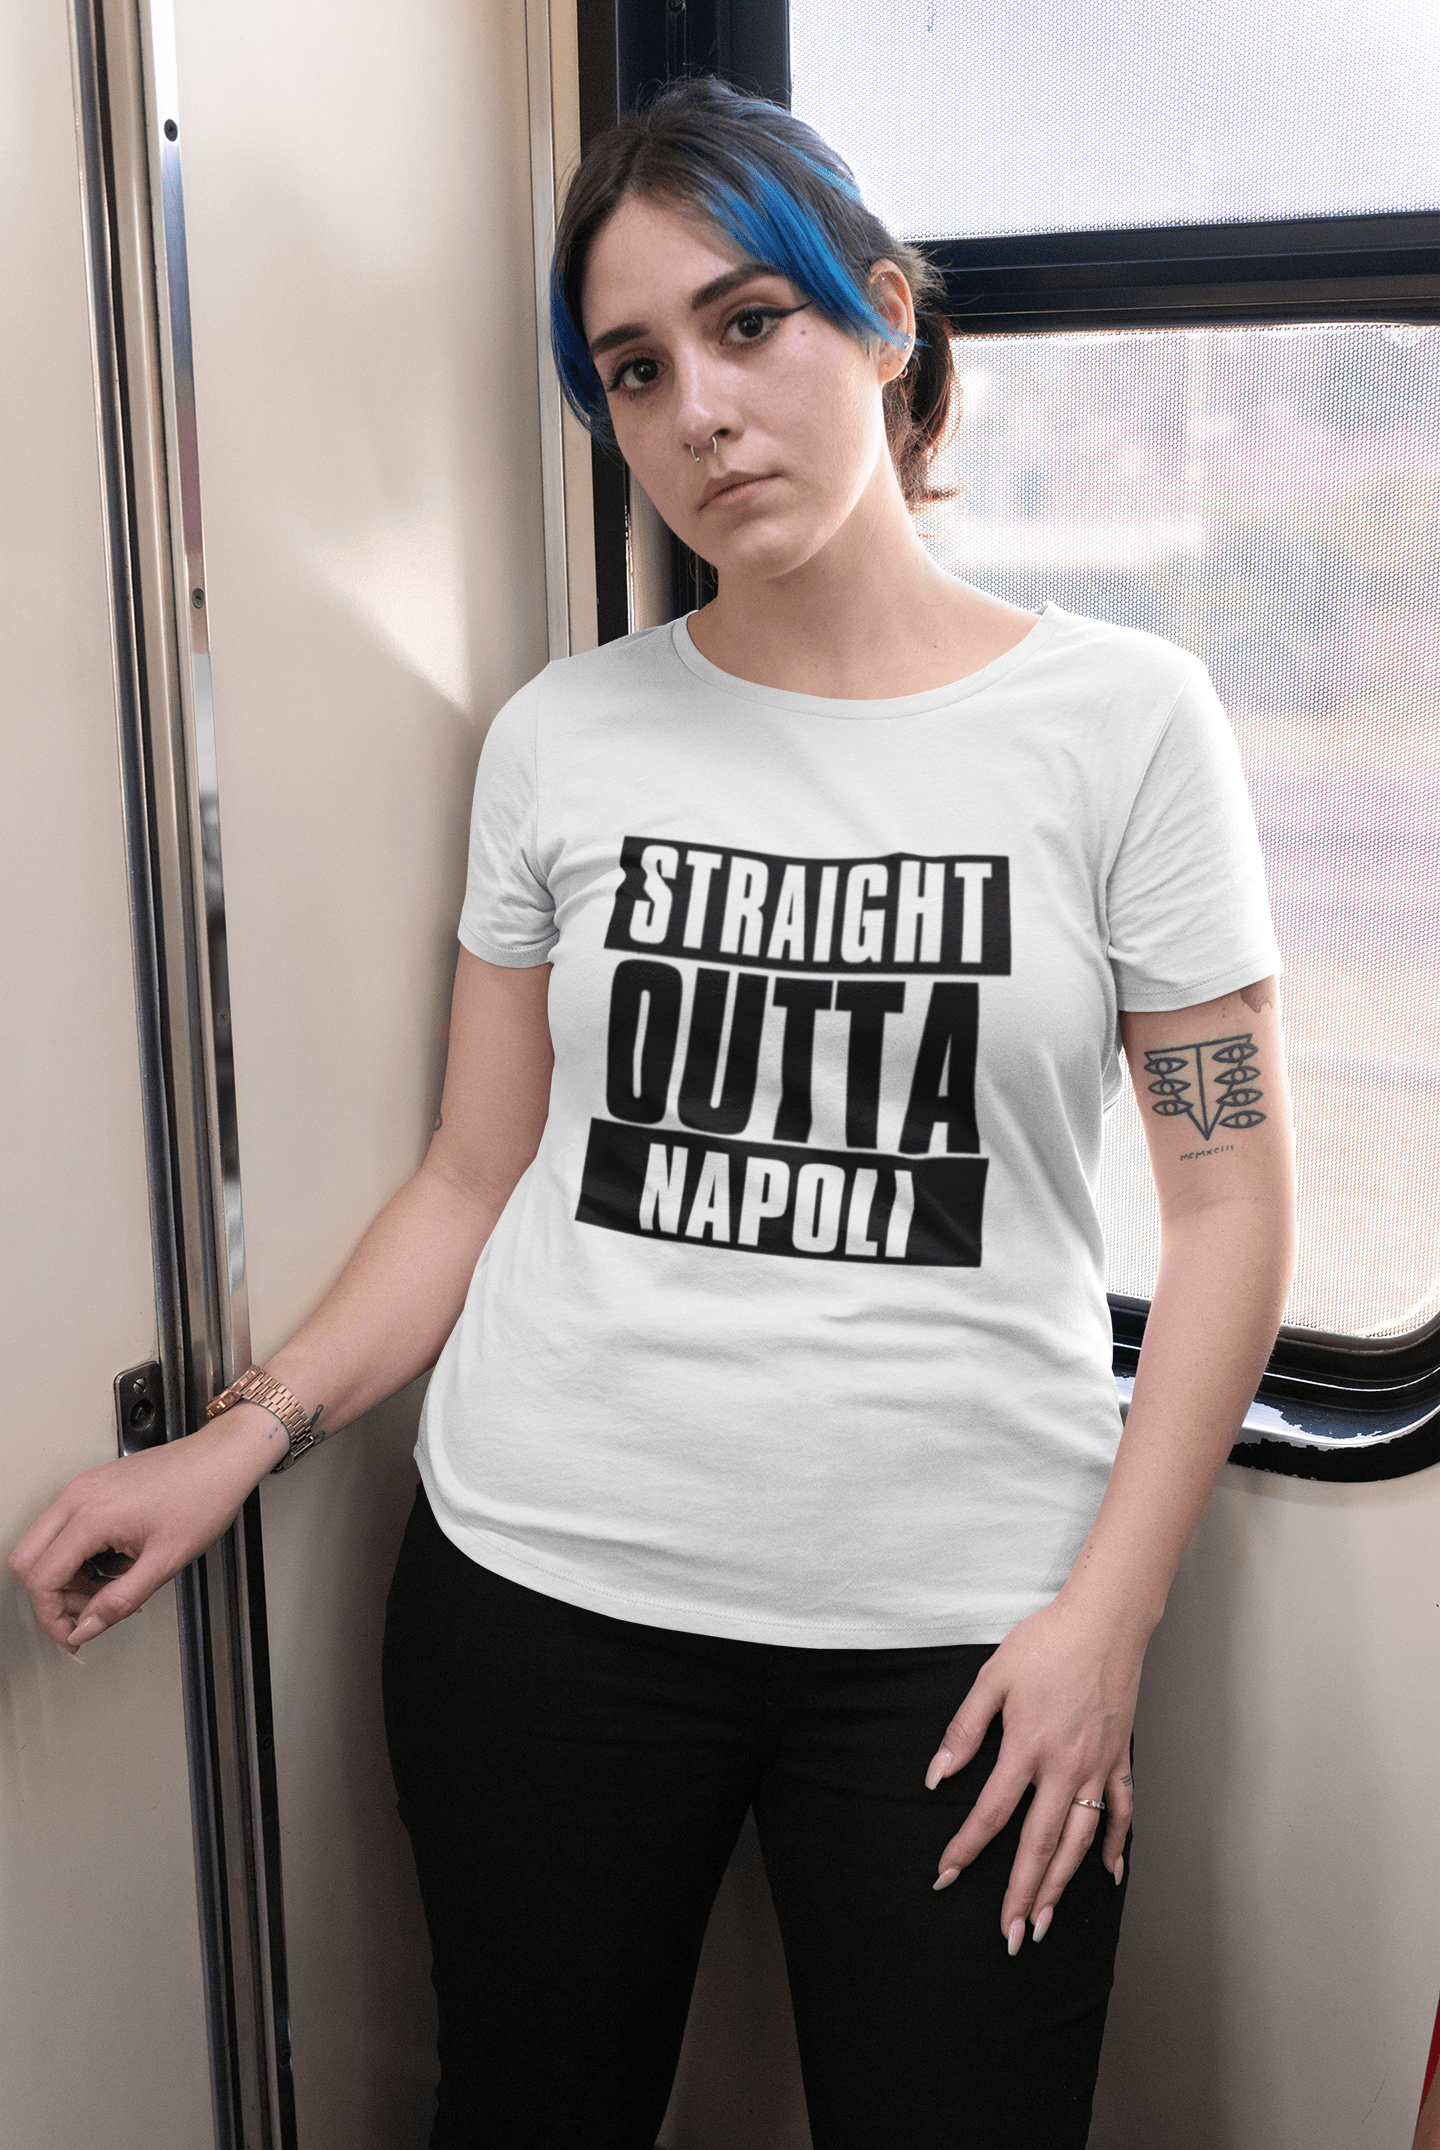 Straight Outta Napoli Women'S Short Sleeve Round Neck T-Shirt, 100% Cotton, Available In SizeS XS, S, M, L, Xl. 00026